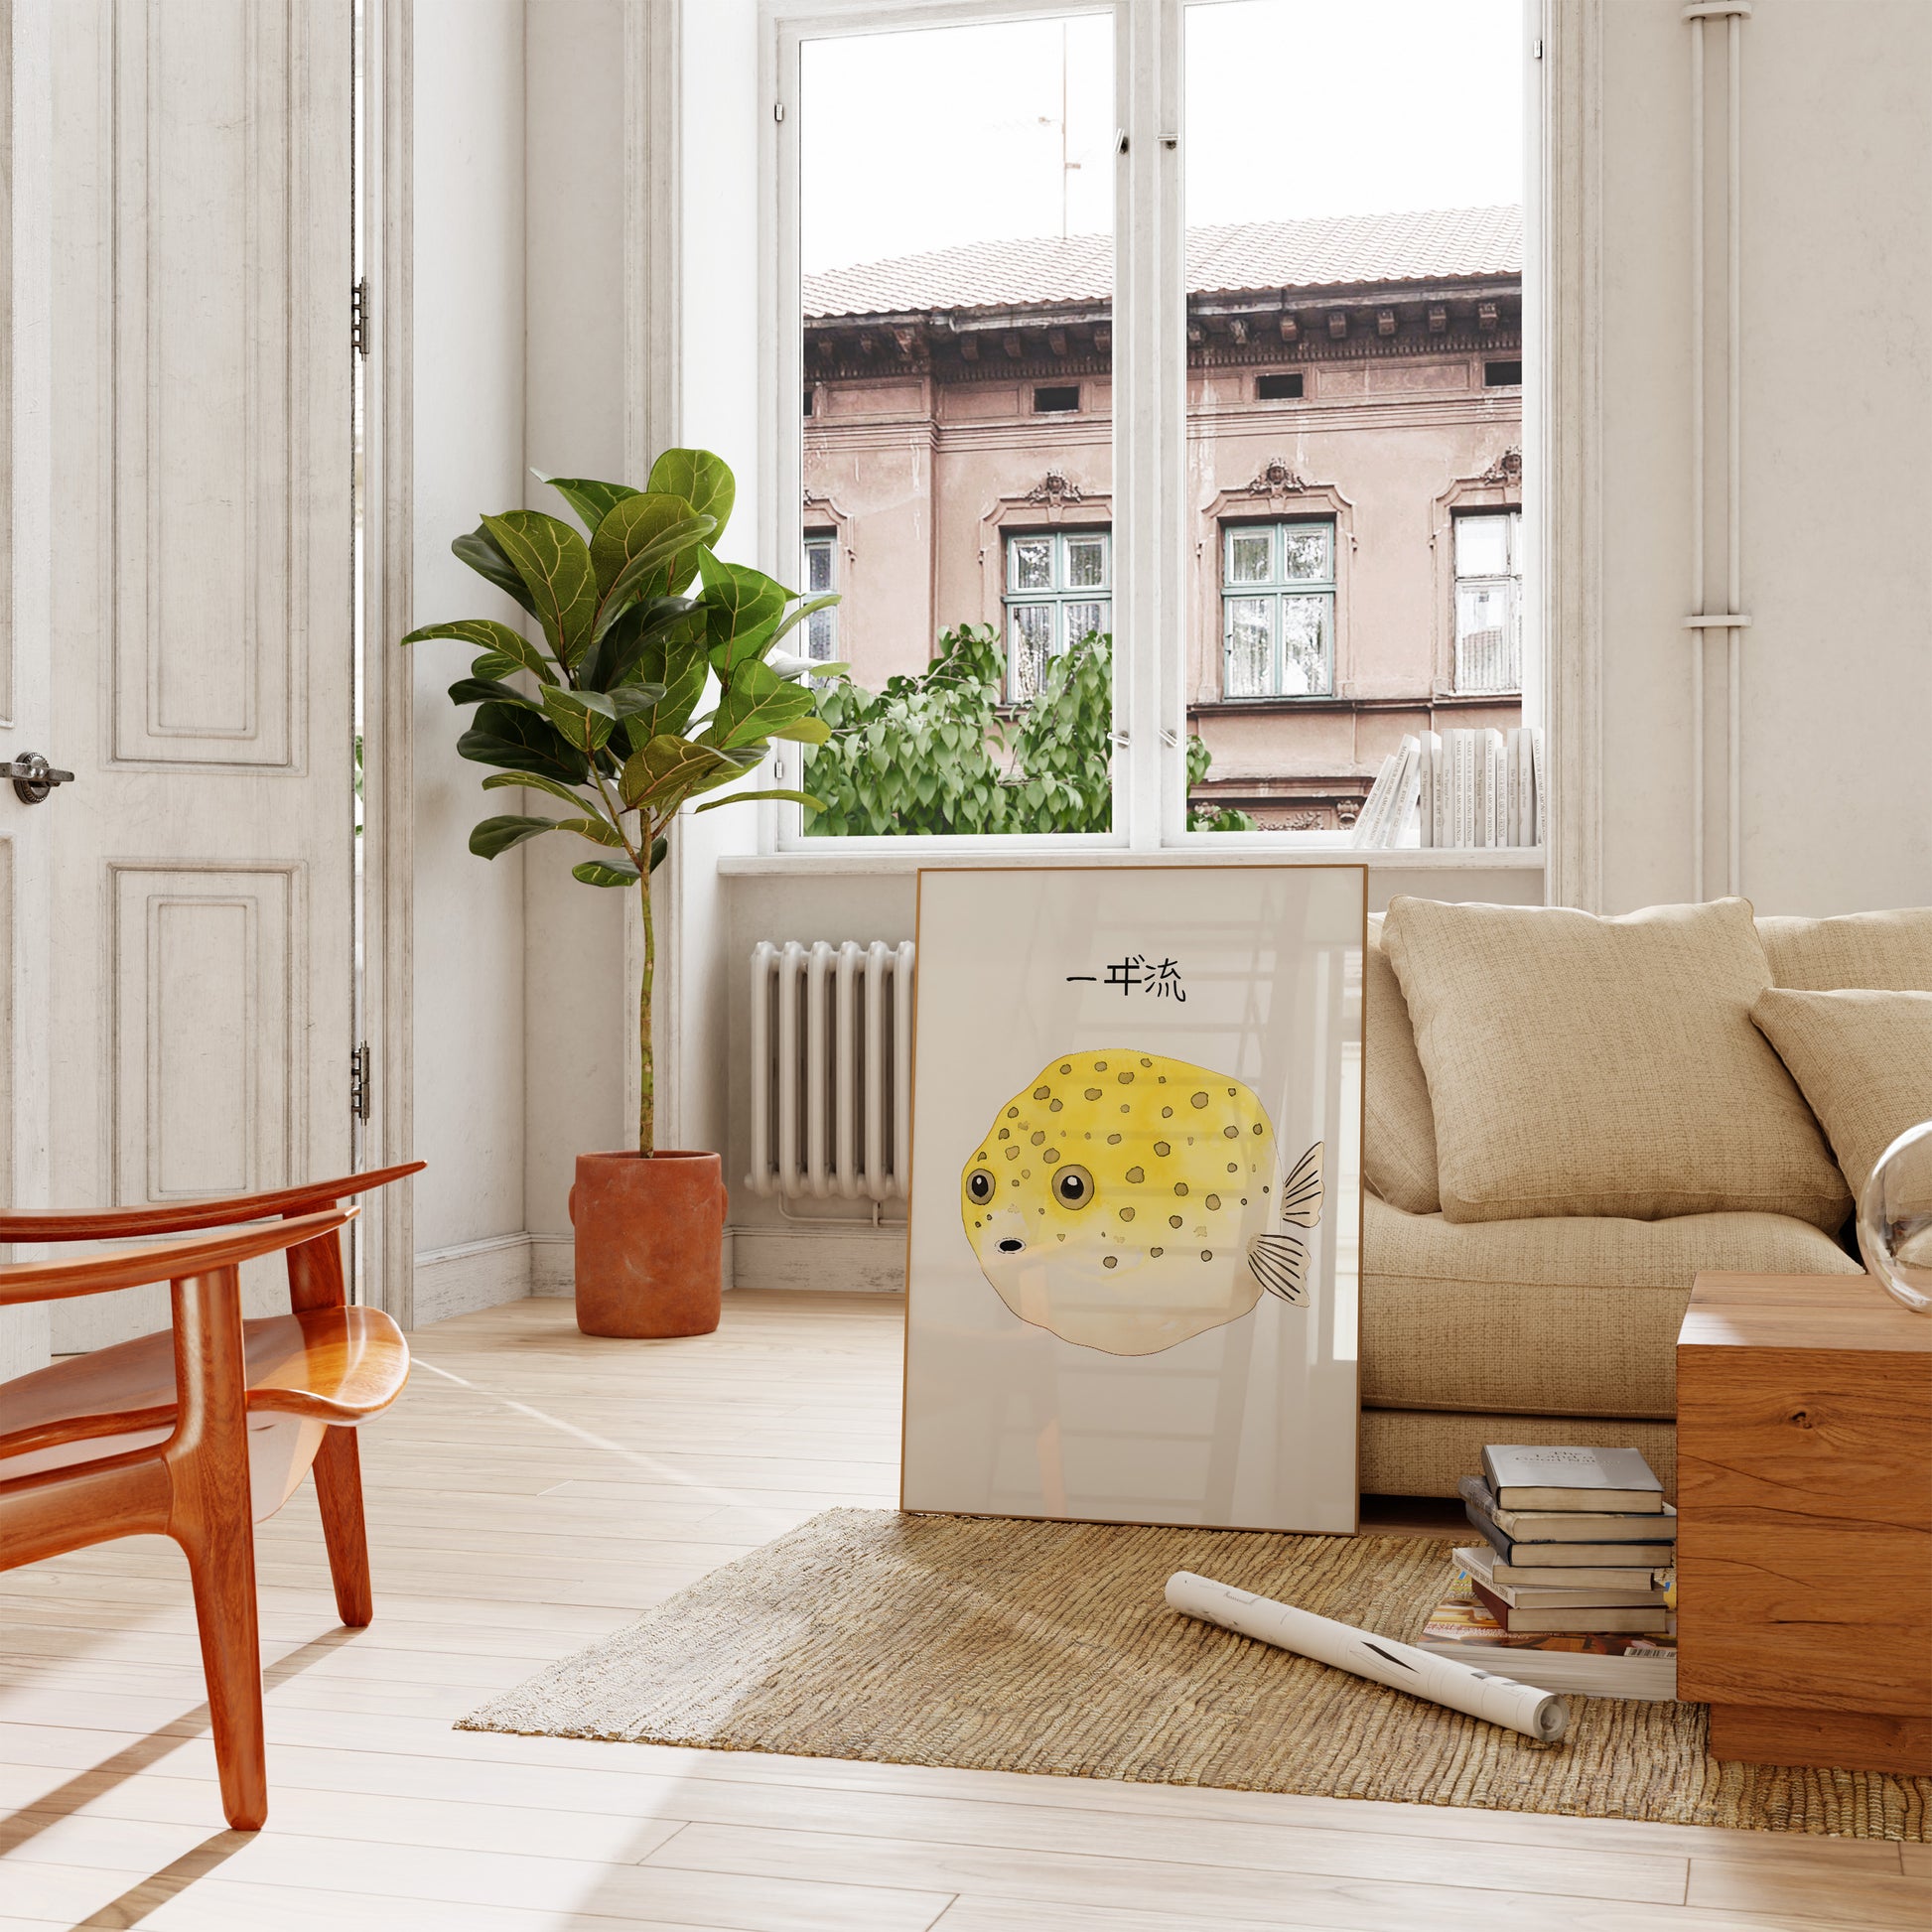 A cozy living room with a sofa, wooden table, potted plant, and artwork leaning against the wall.